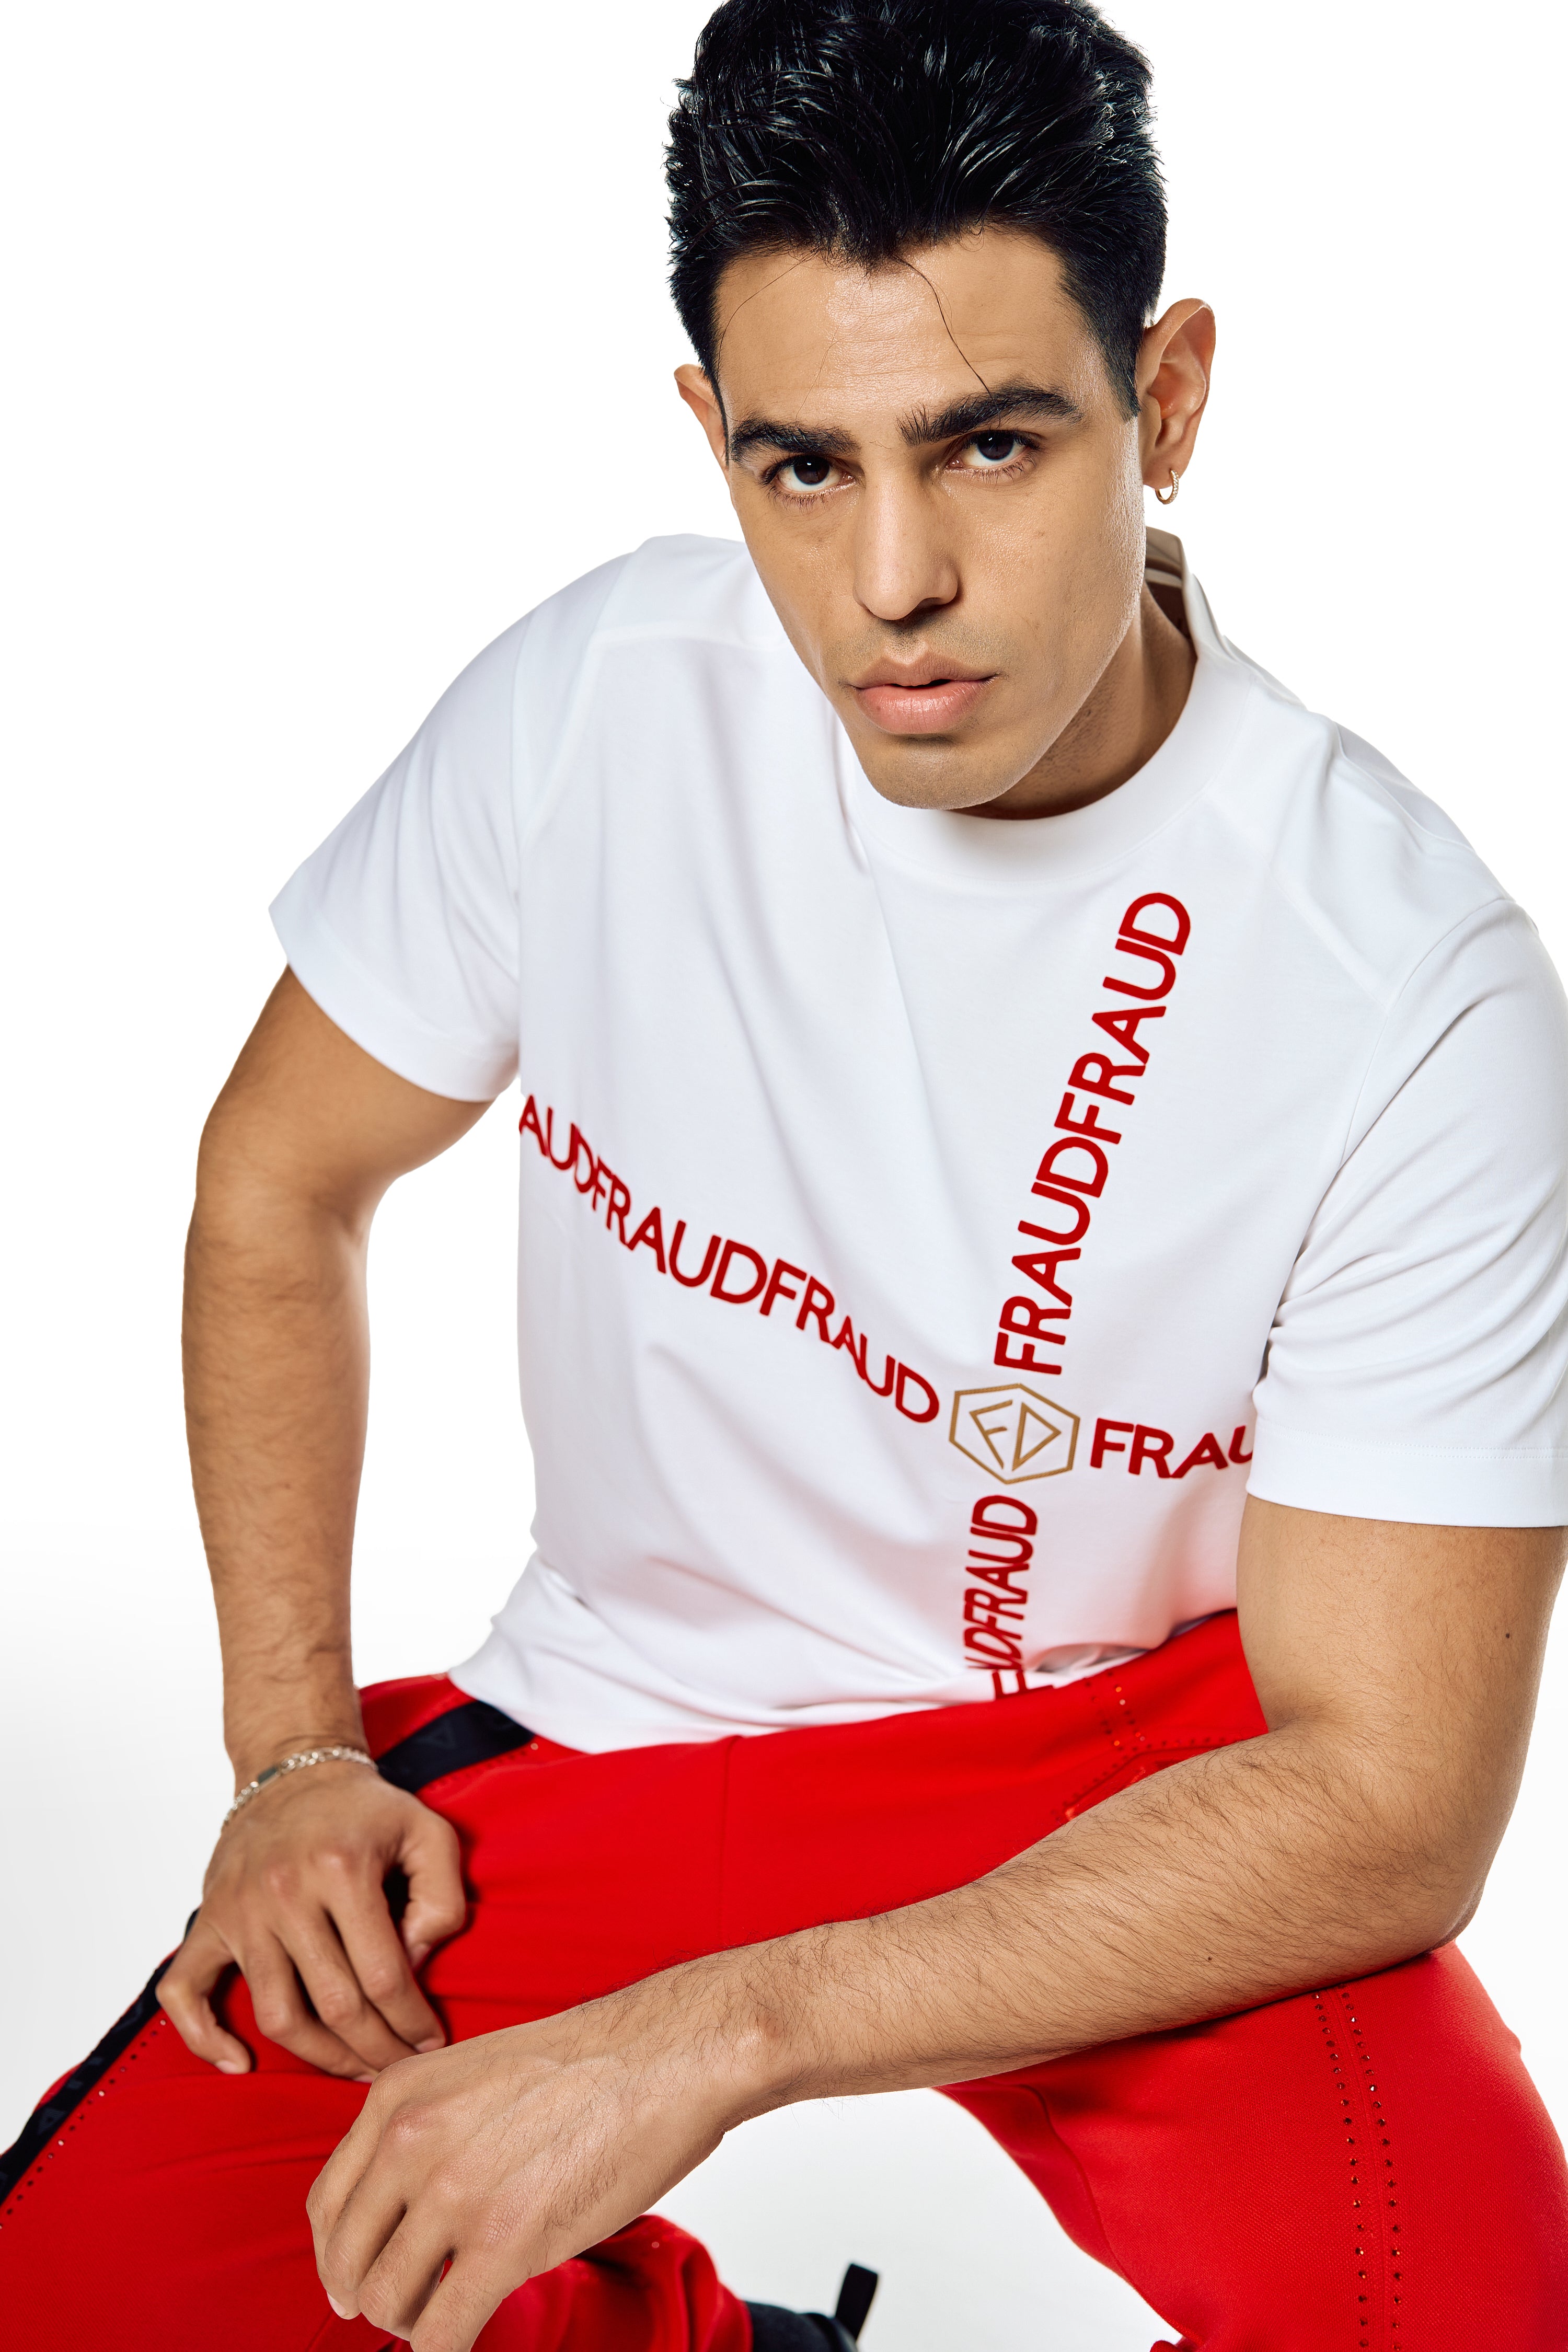 SHORT SLEAVE T-SHIRT WHITE WITH RED DECORATION